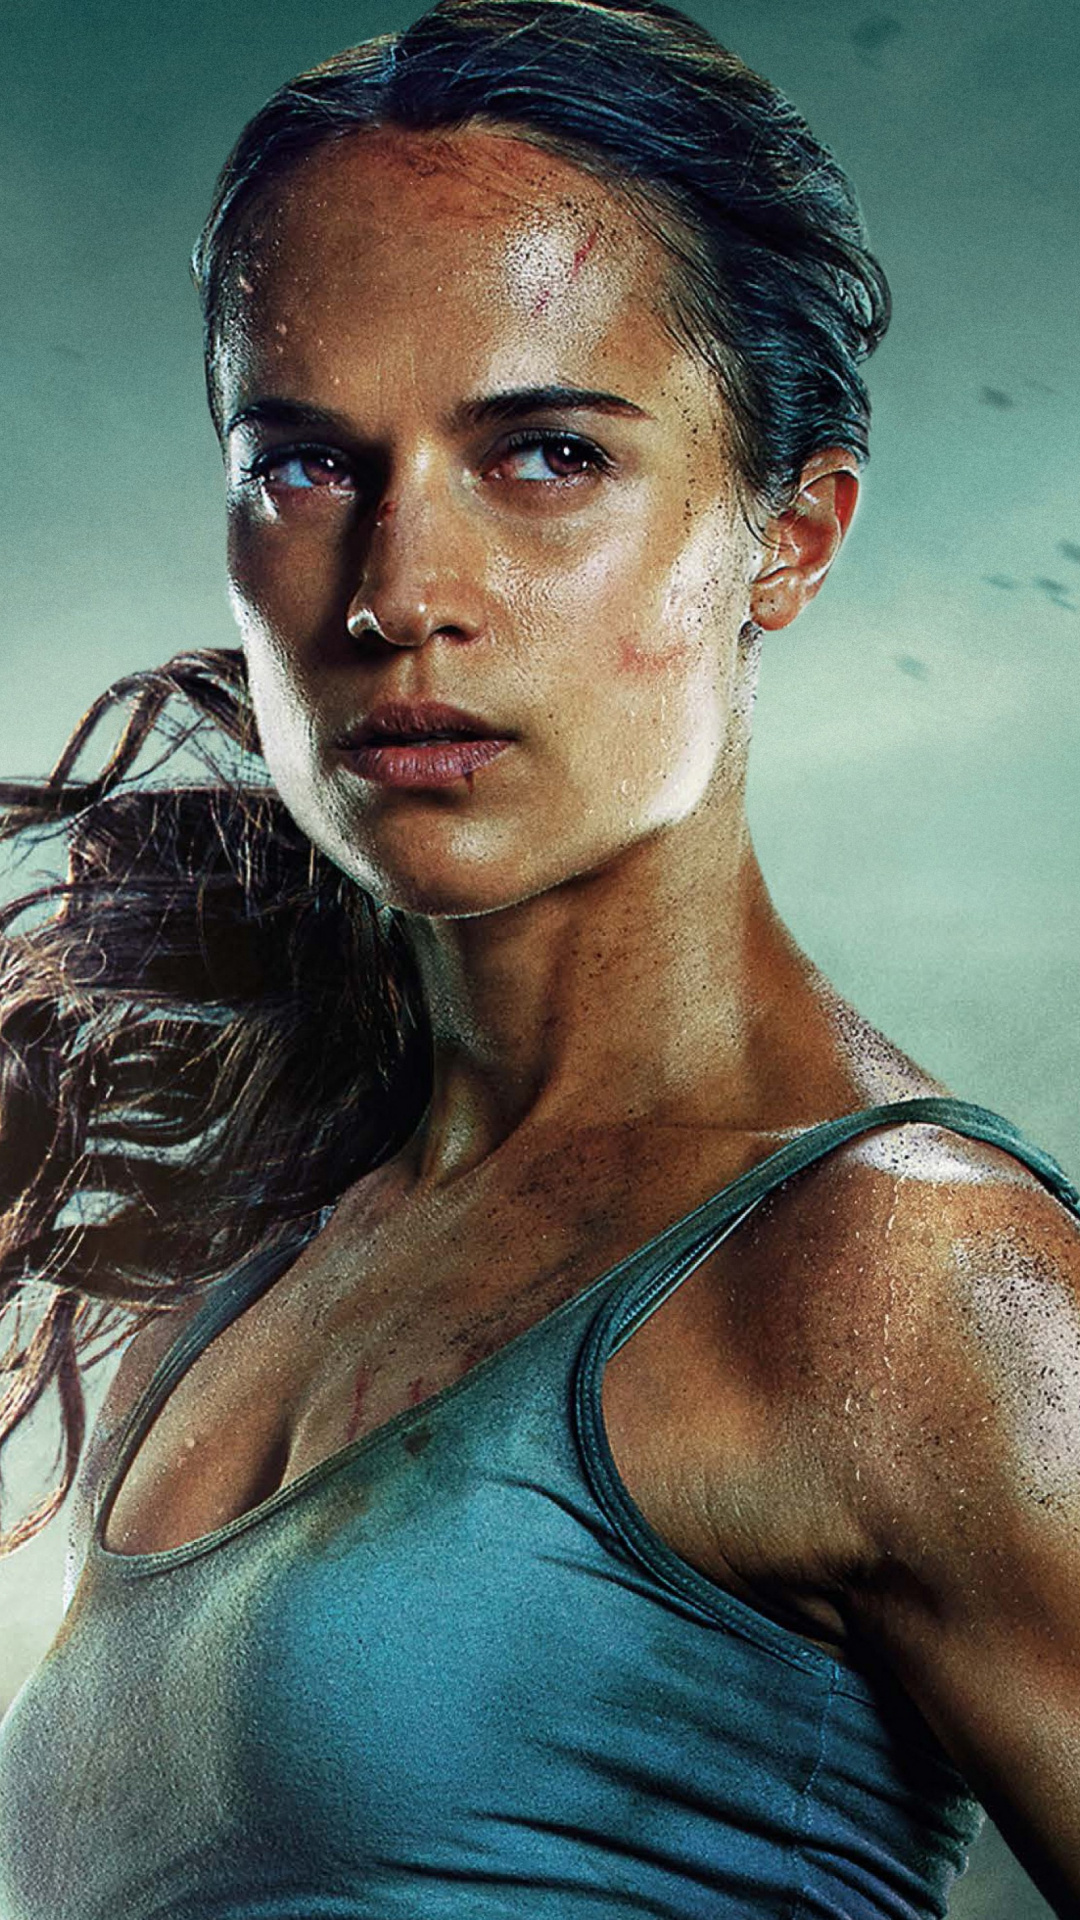 Tomb Raider: Determined to solve the mystery behind her father's disappearance. 1080x1920 Full HD Wallpaper.